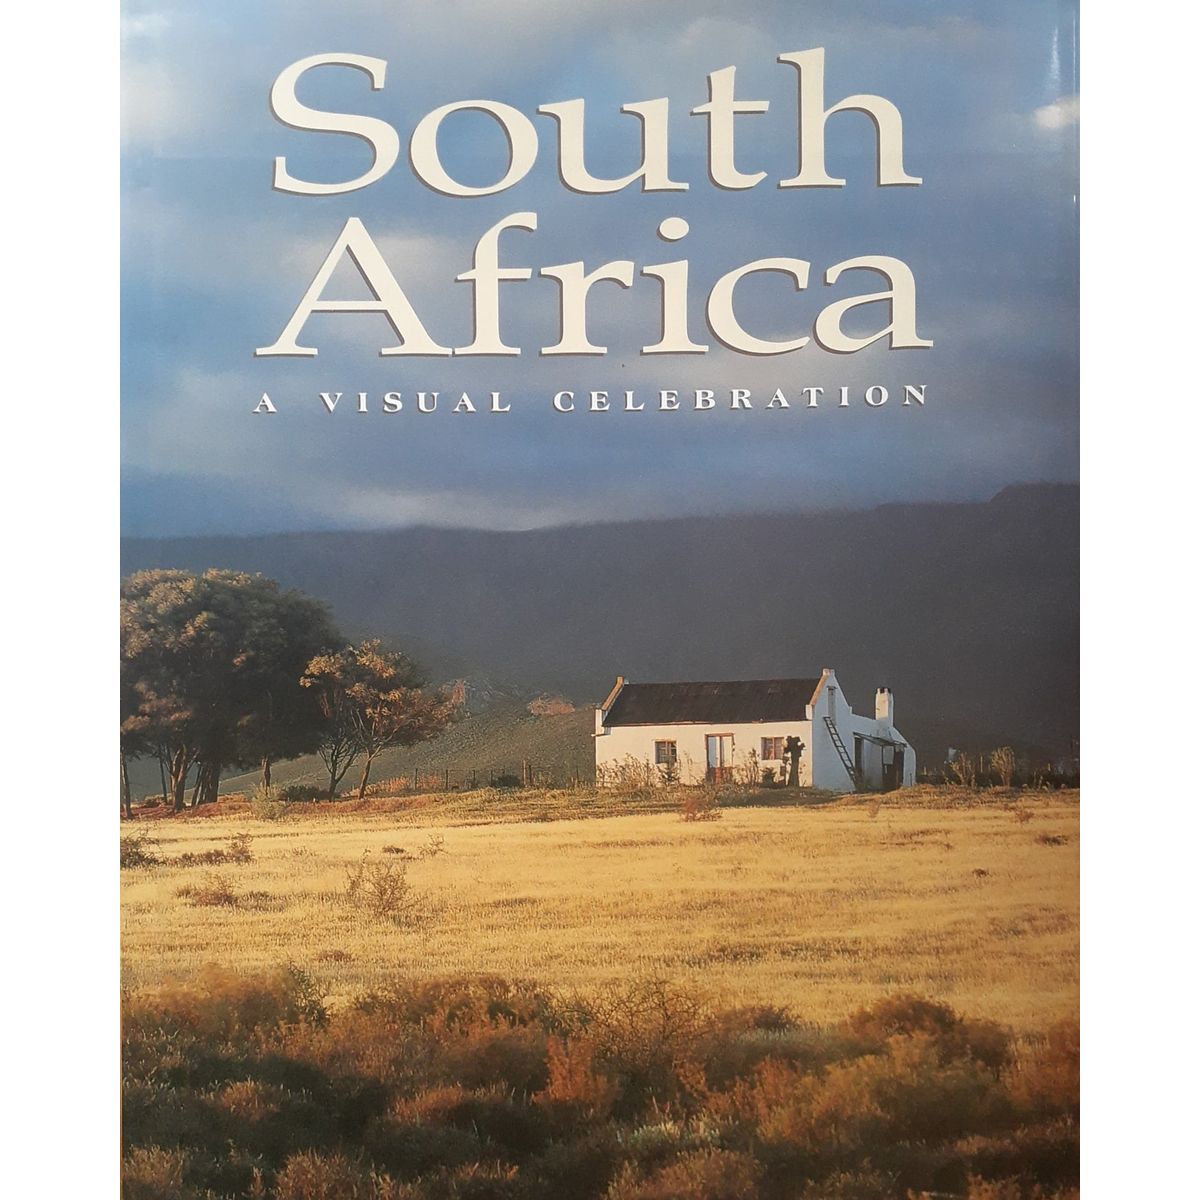 ISBN: 9781868259571 / 1868259579 - South Africa: A Visual Celebration by Elaine Hurford [2005]